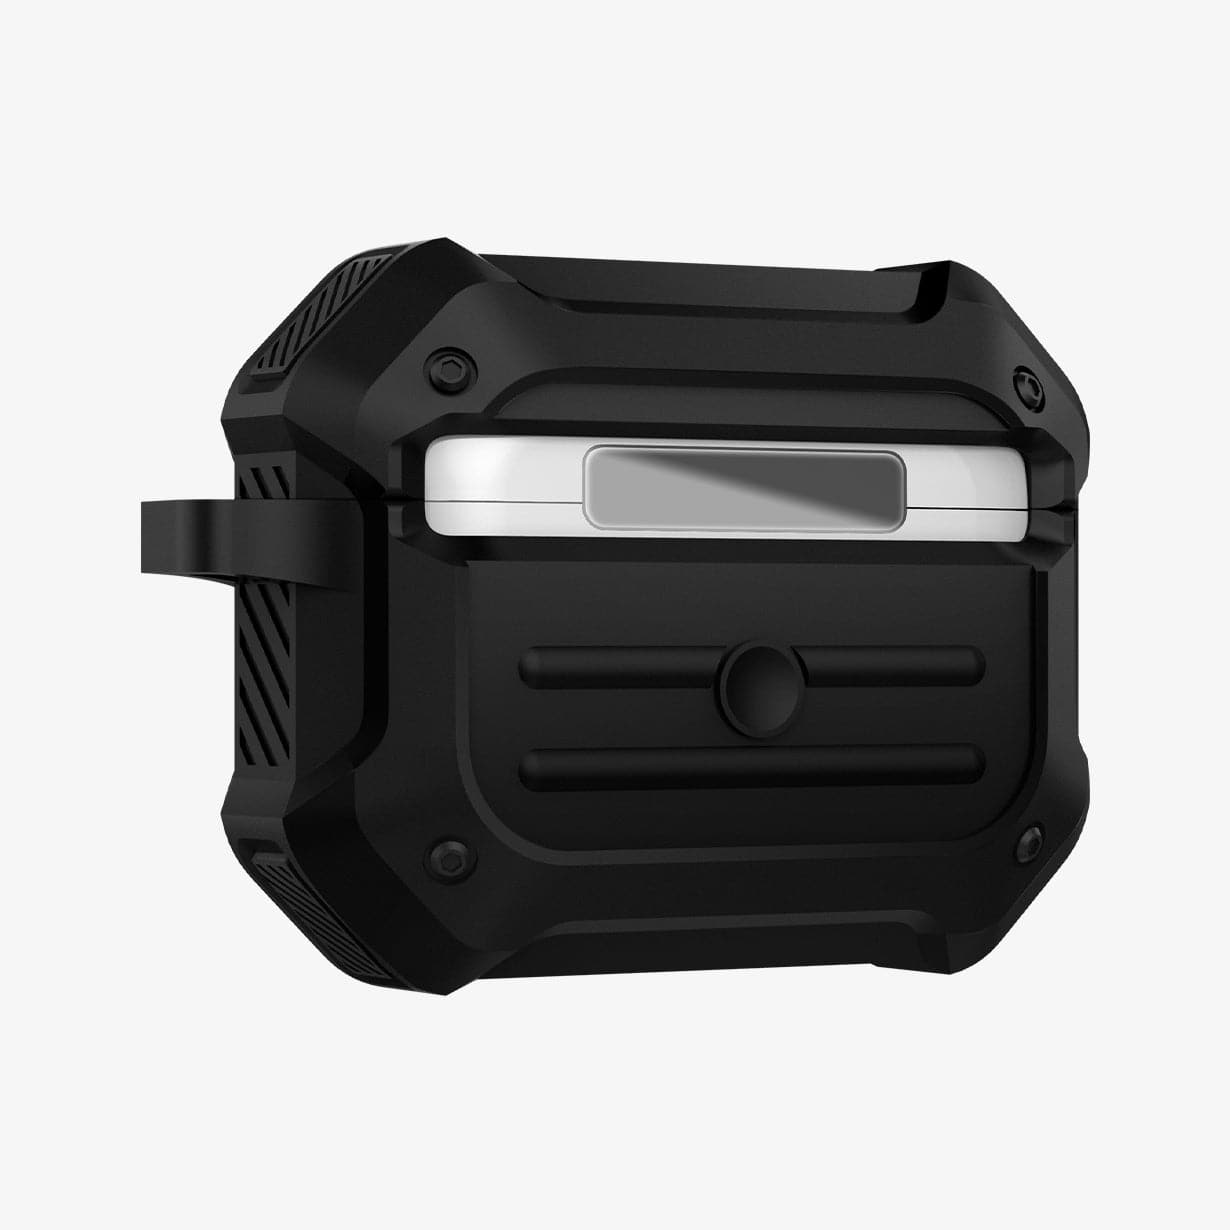 ASD00537 - Apple AirPods Pro Case Tough Armor in black showing the back and side